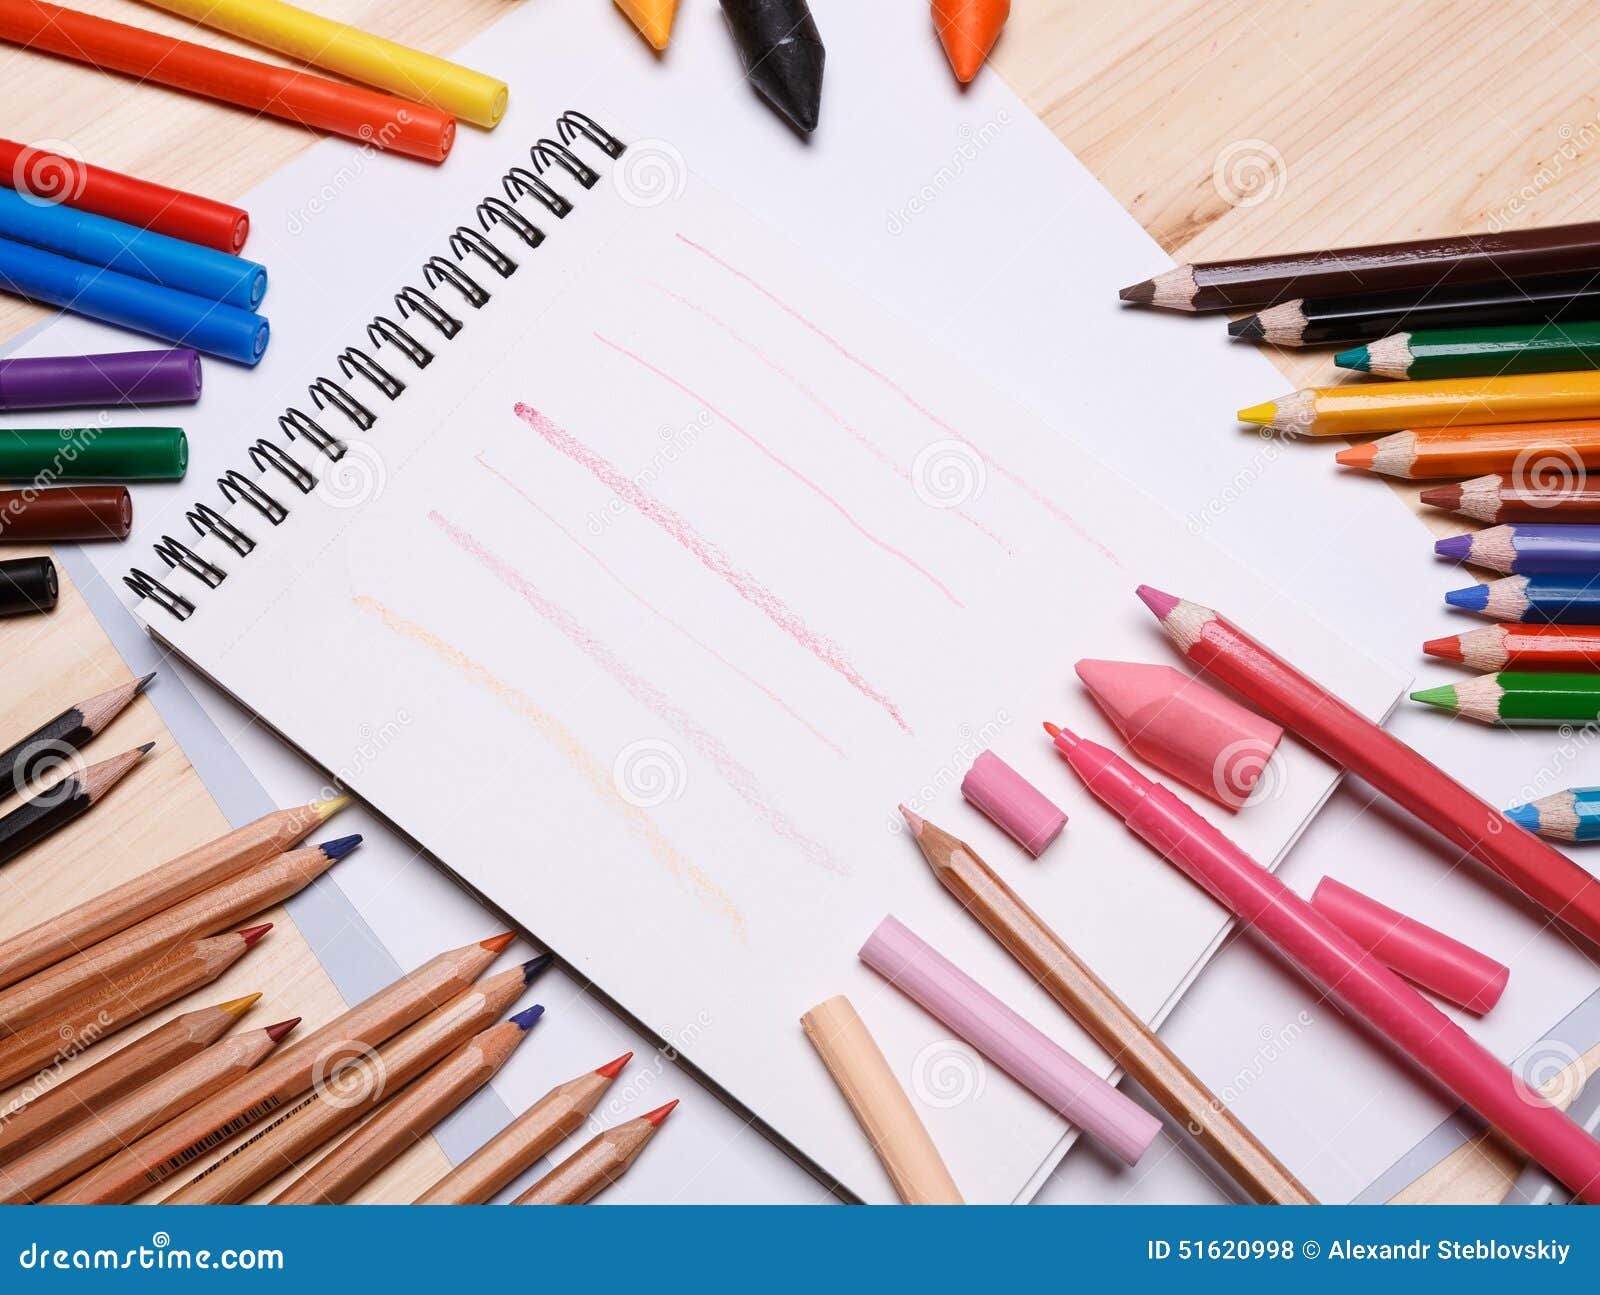 Drawing materials stock photo. Image of brown, black - 51620998